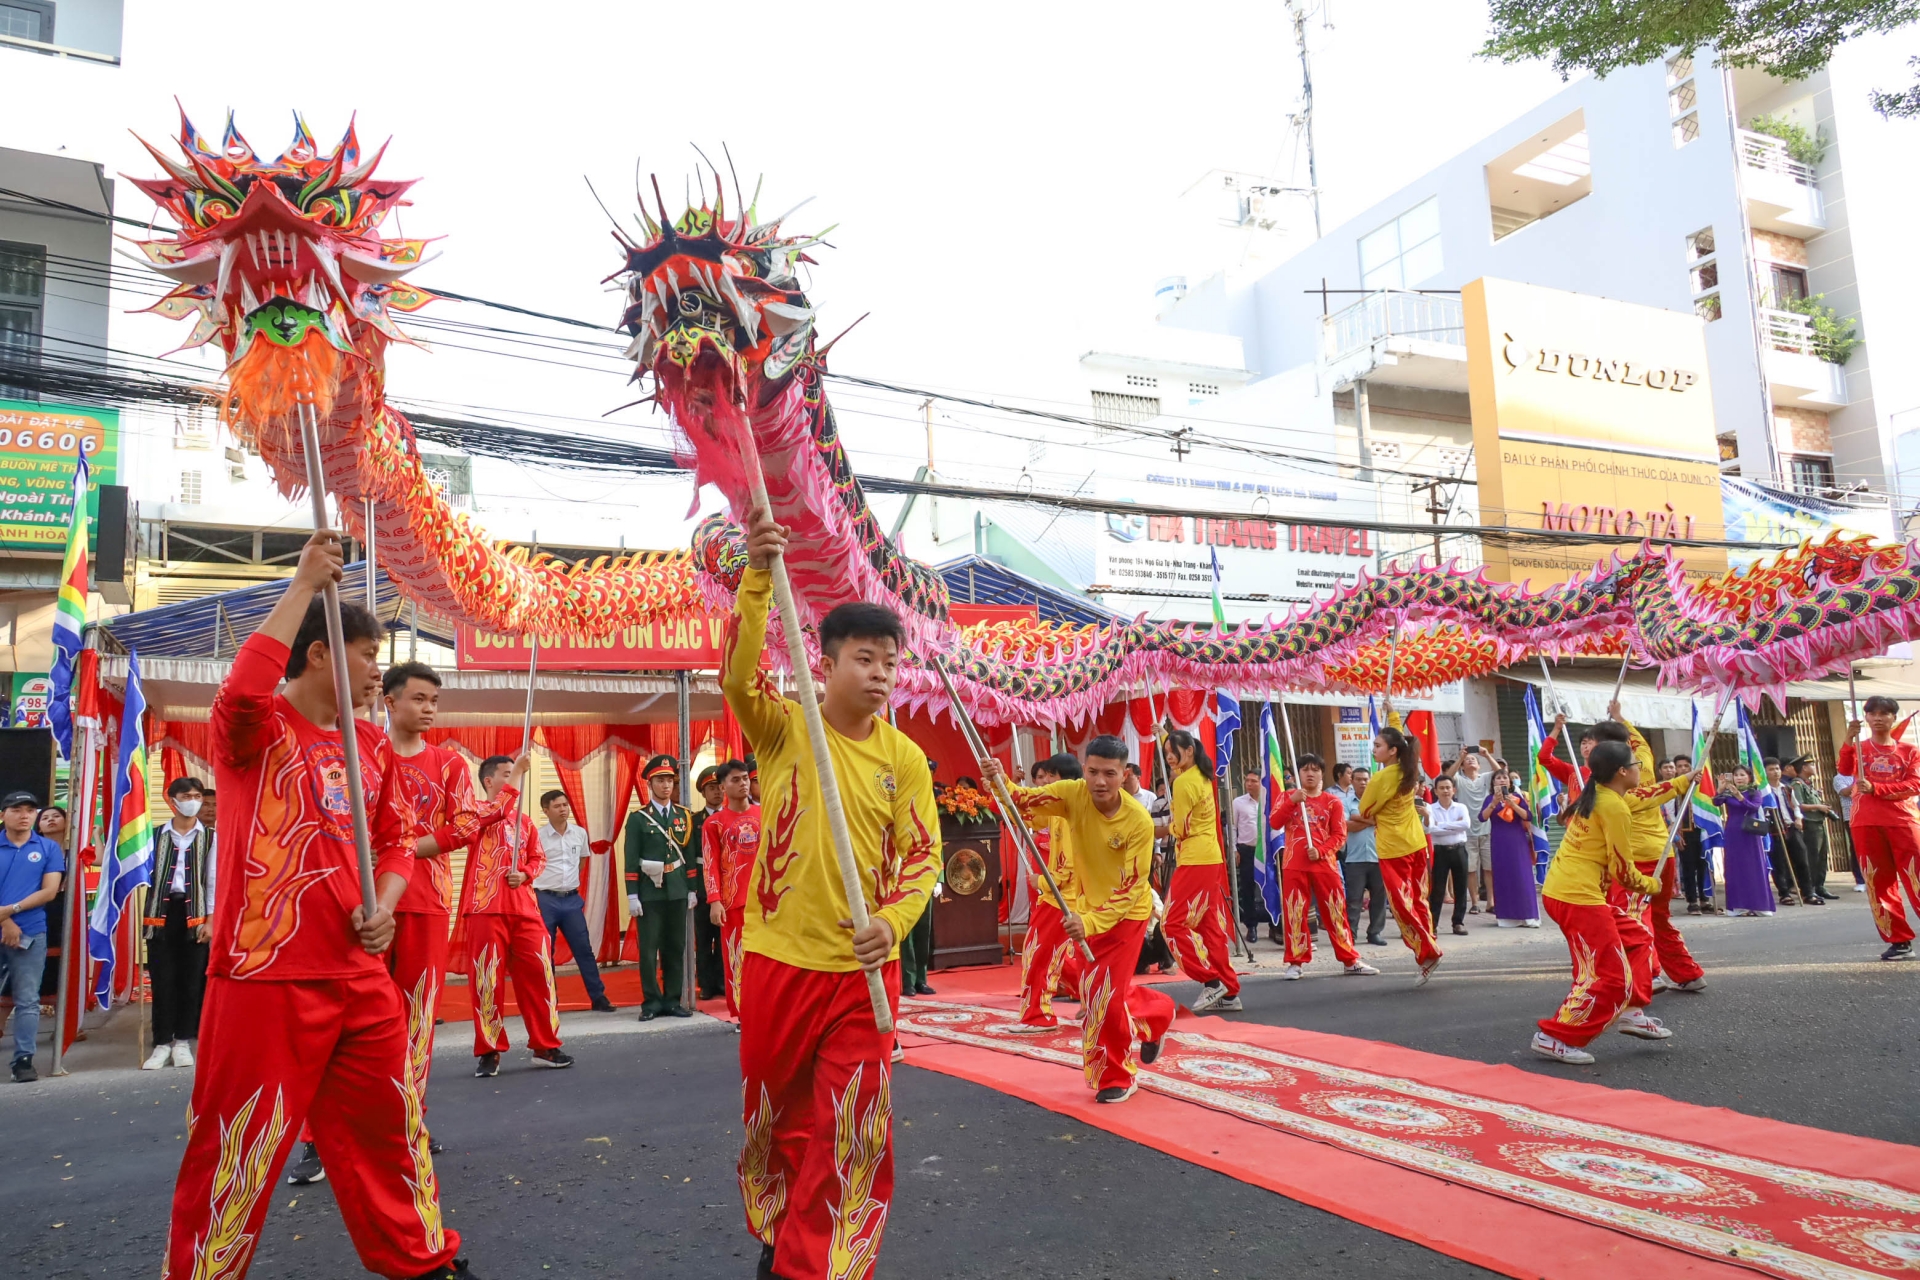 Dragon dance performed at the ceremony